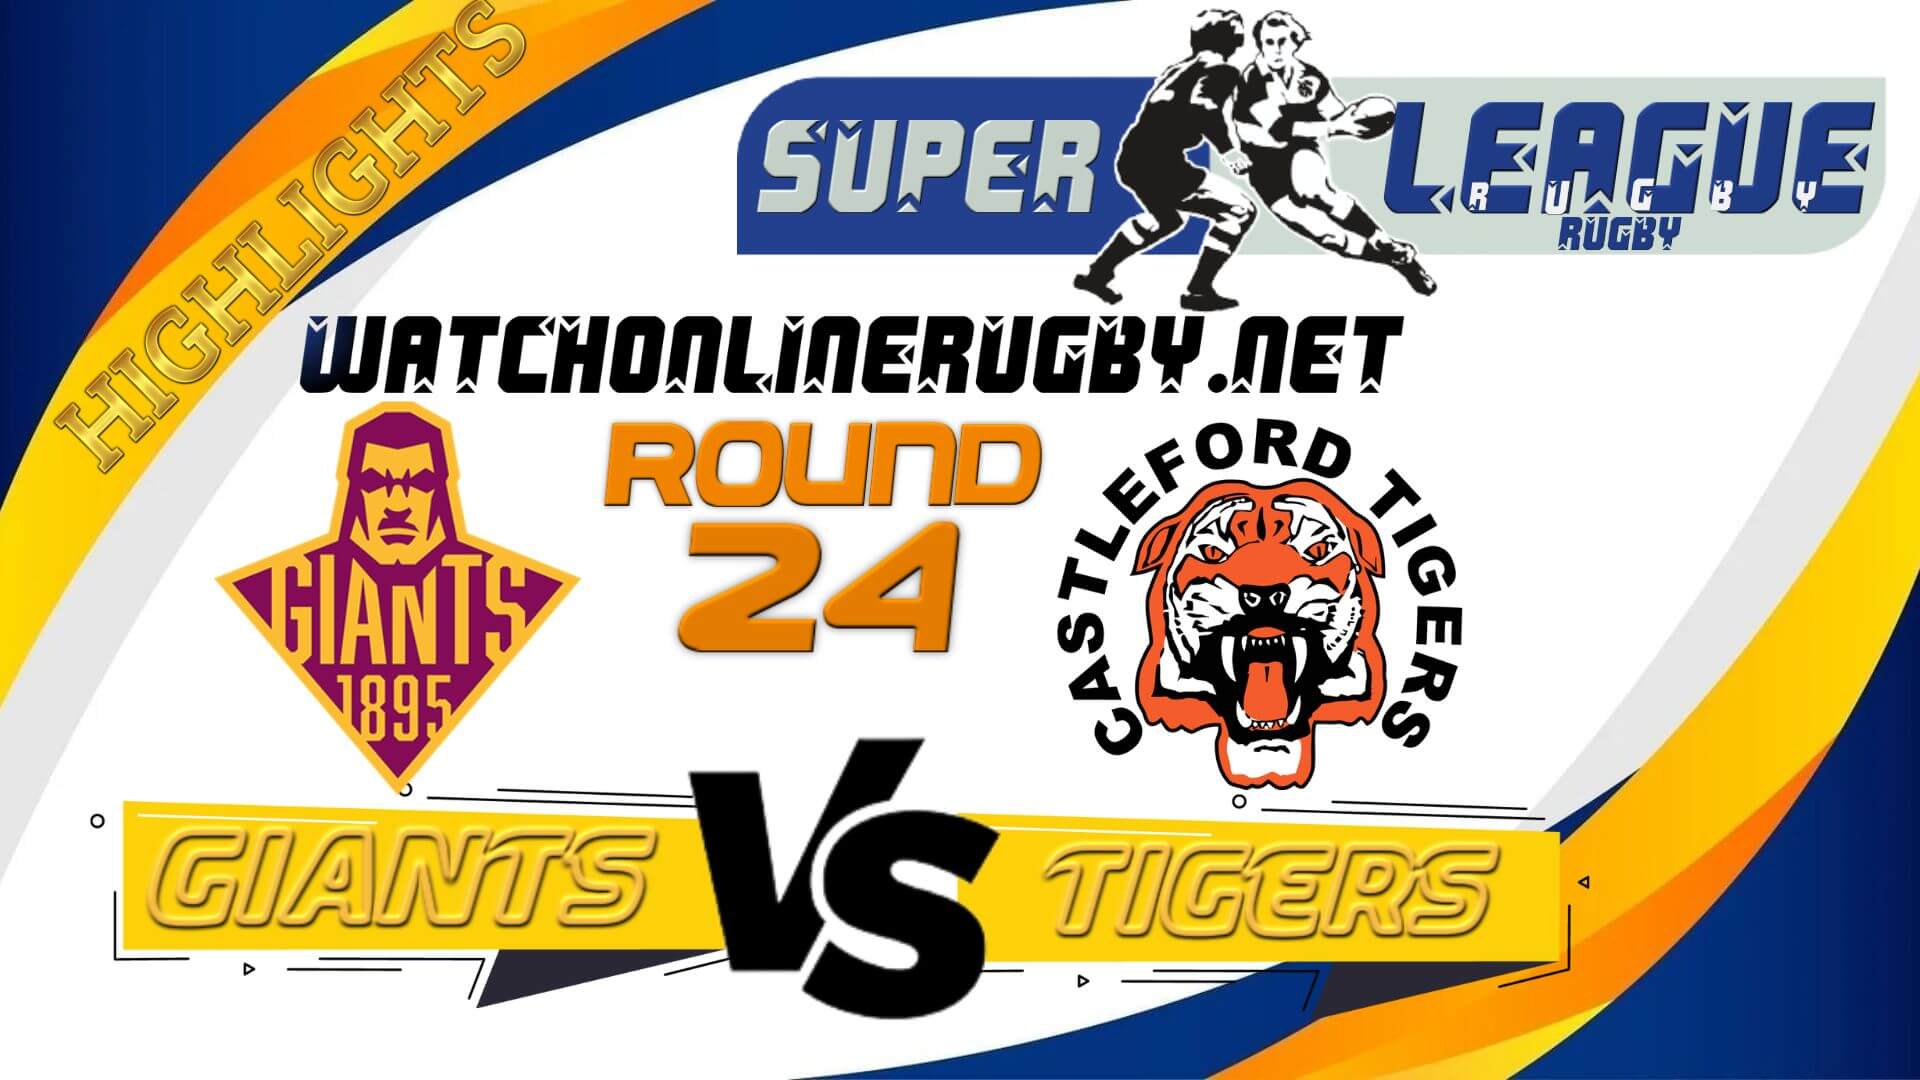 Huddersfield Giants Vs Castleford Tigers Super League Rugby 2022 RD 24